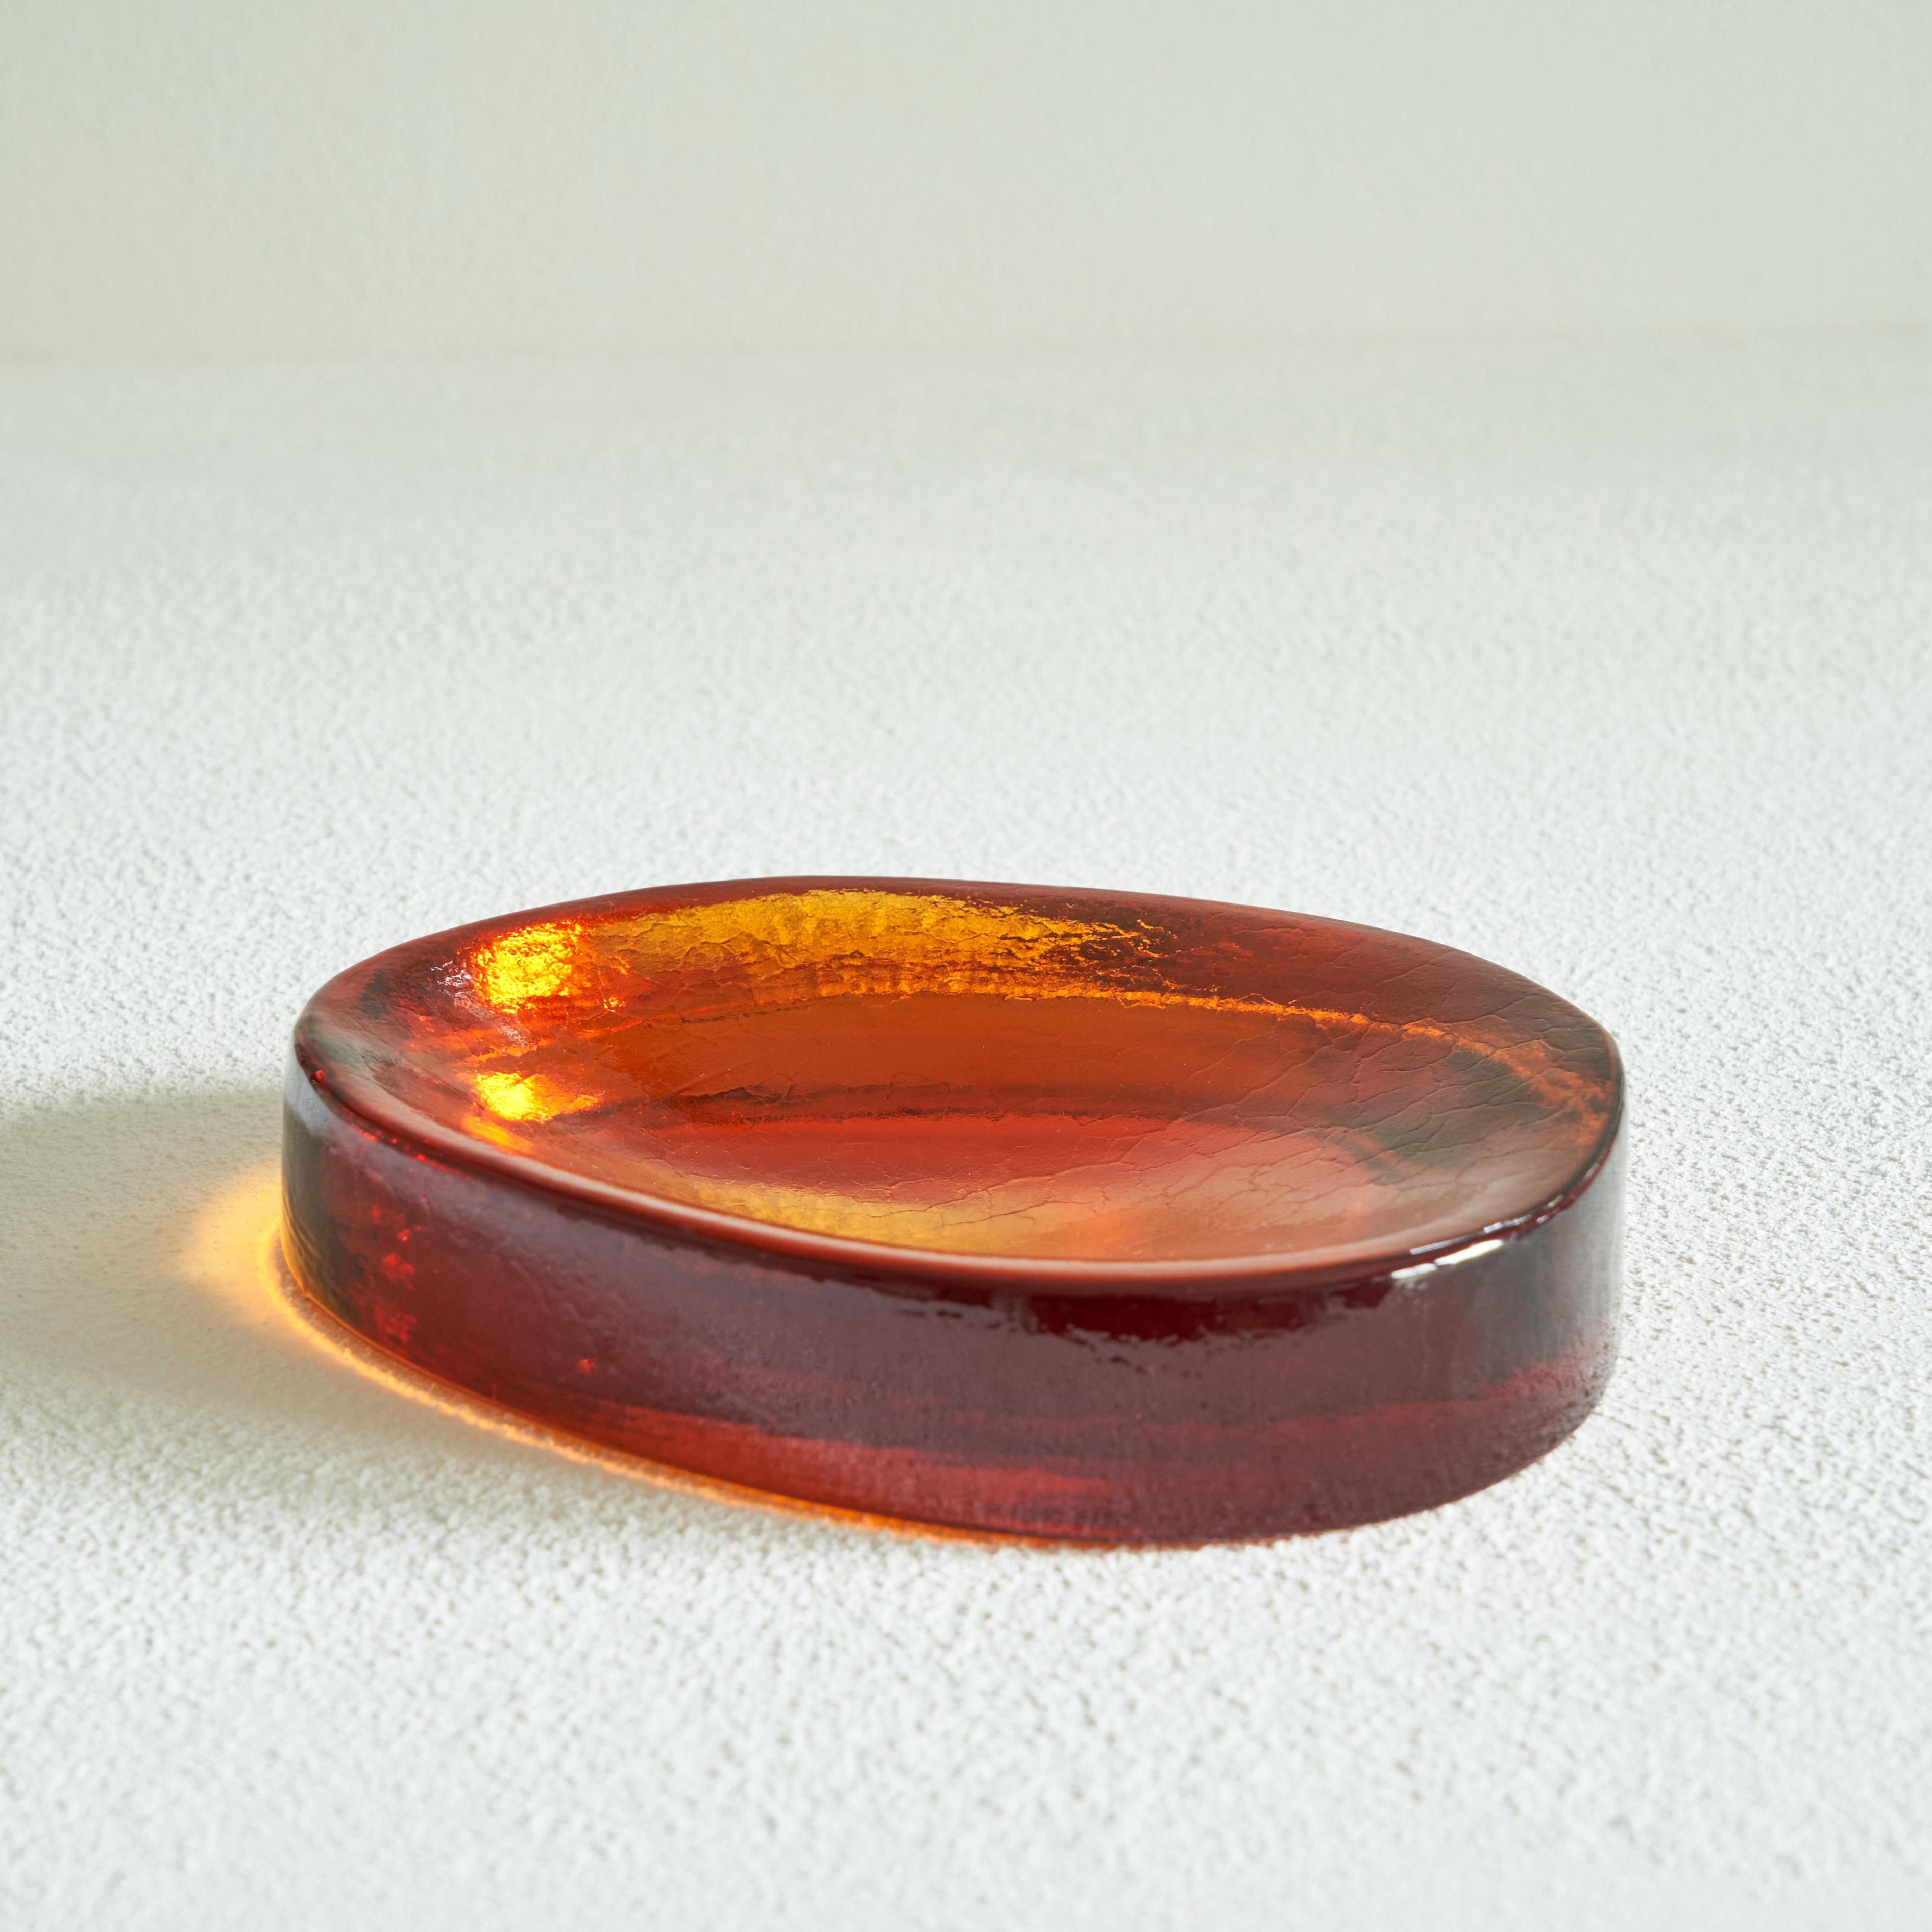 Hand-Crafted Freeform Concave Amber Colored Vide Poche in Solid Glass, 1960s For Sale